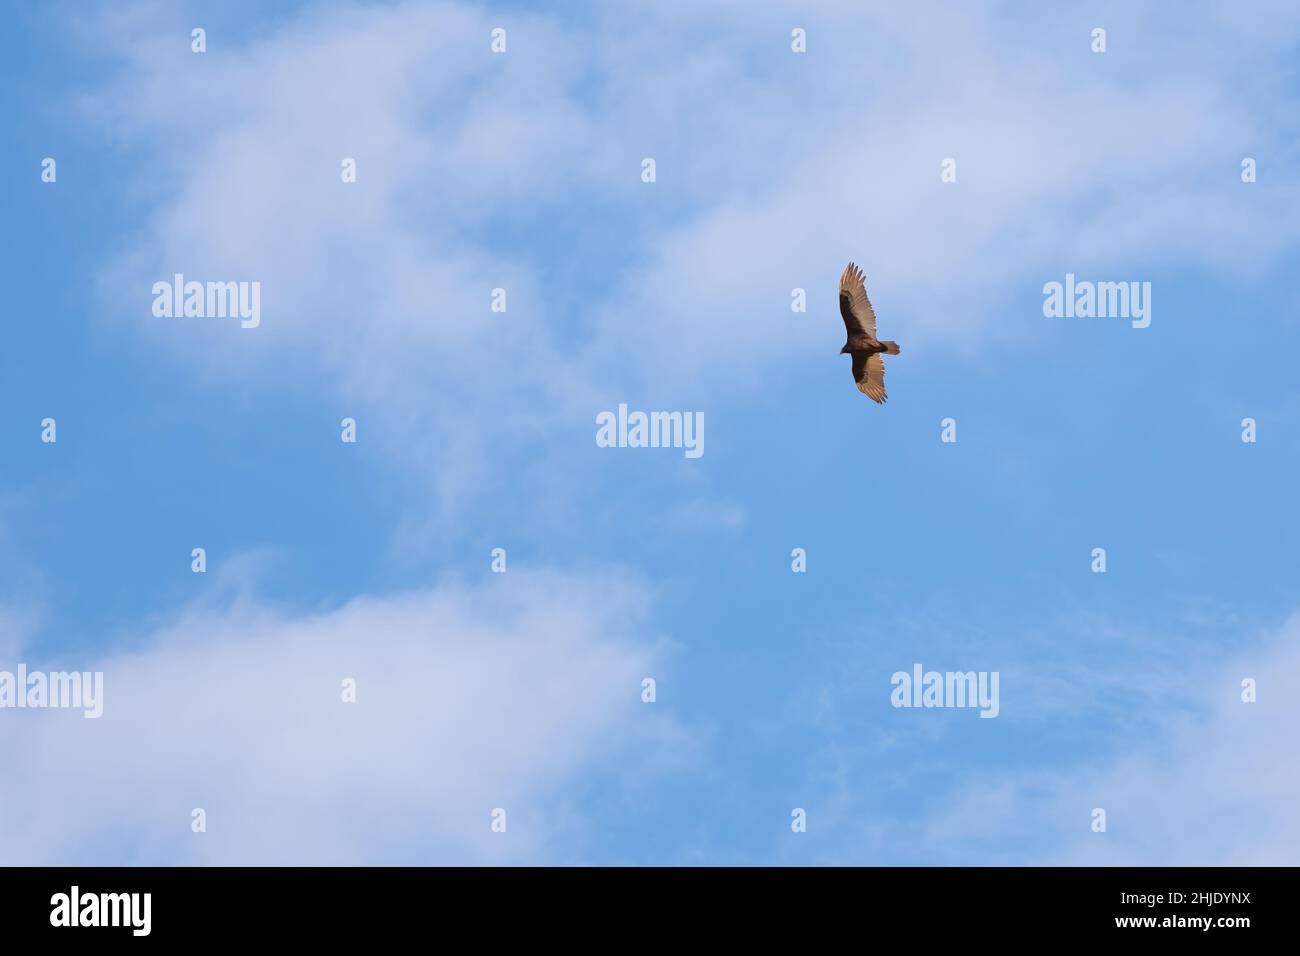 A Turkey Vulture soars high in the sky. Plenty of room for text in the minimalistic view. Stock Photo